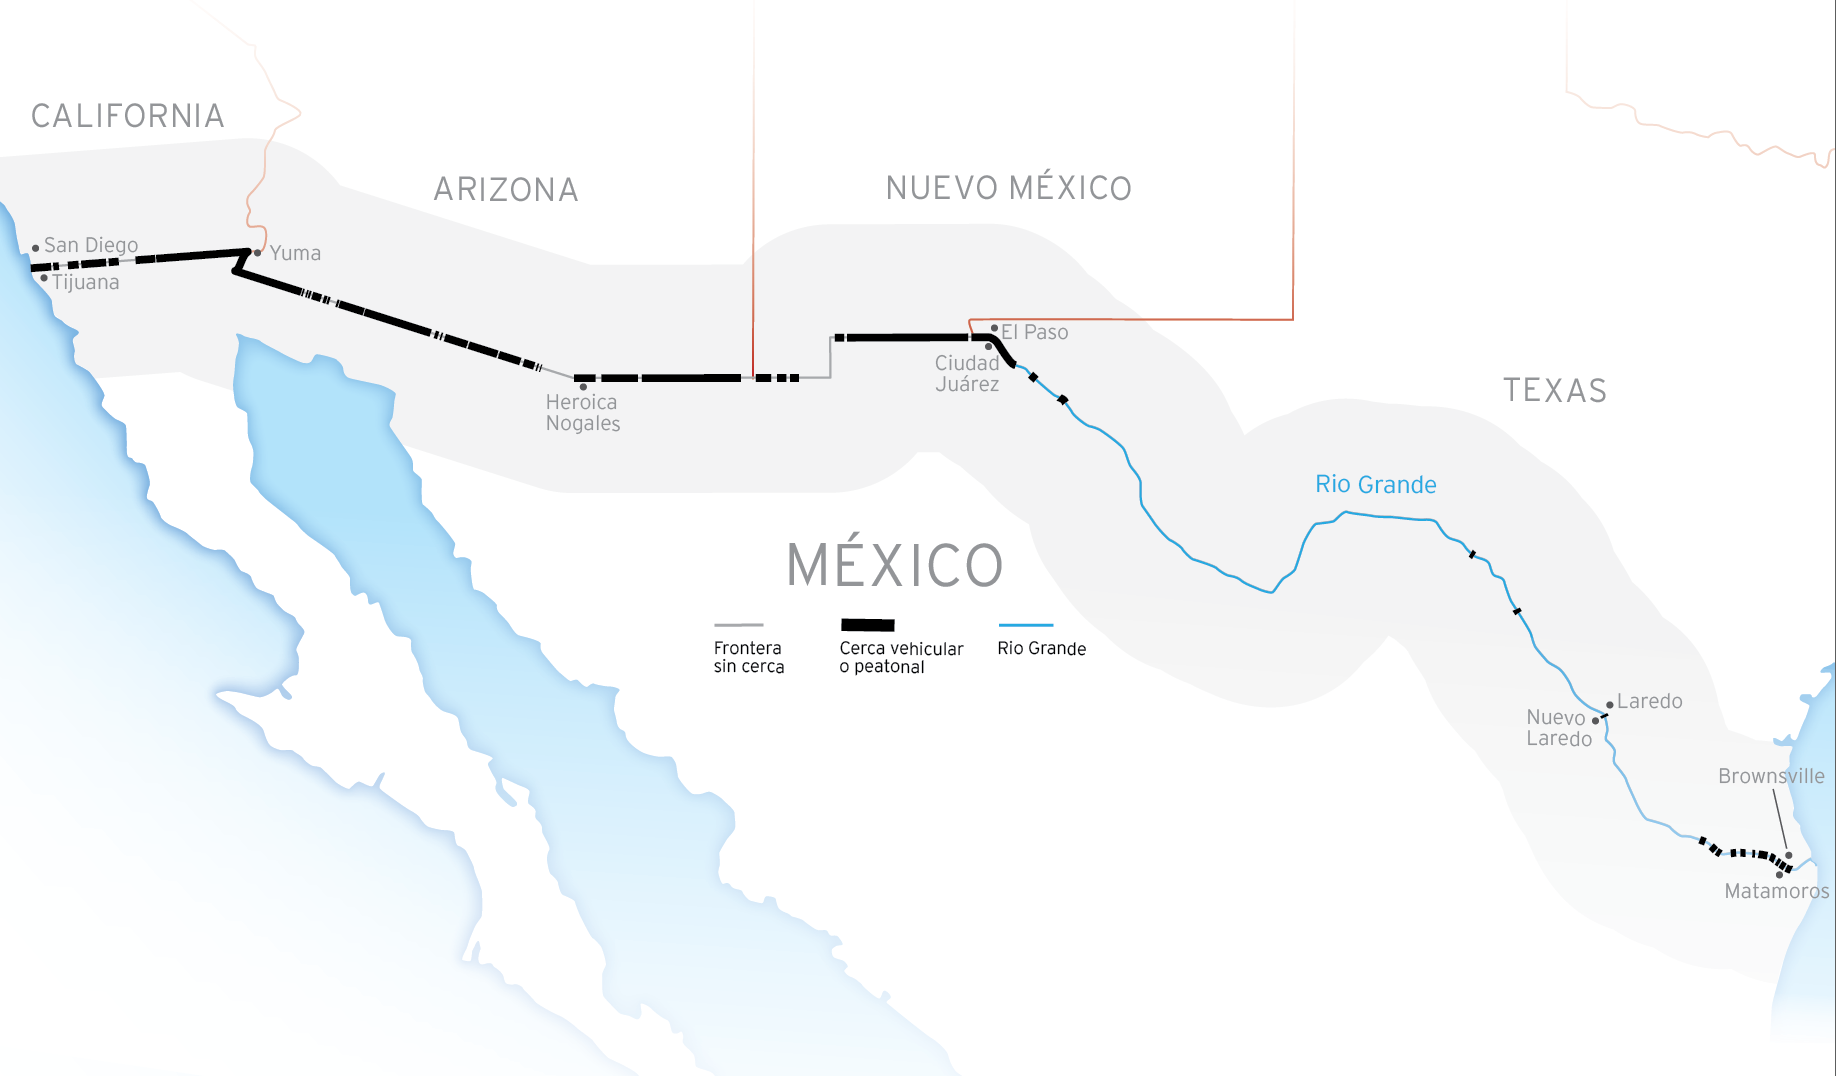 Map showing the composition of the border: Border with no fence, vehicle or pedestrian fence, and the Rio Grande.